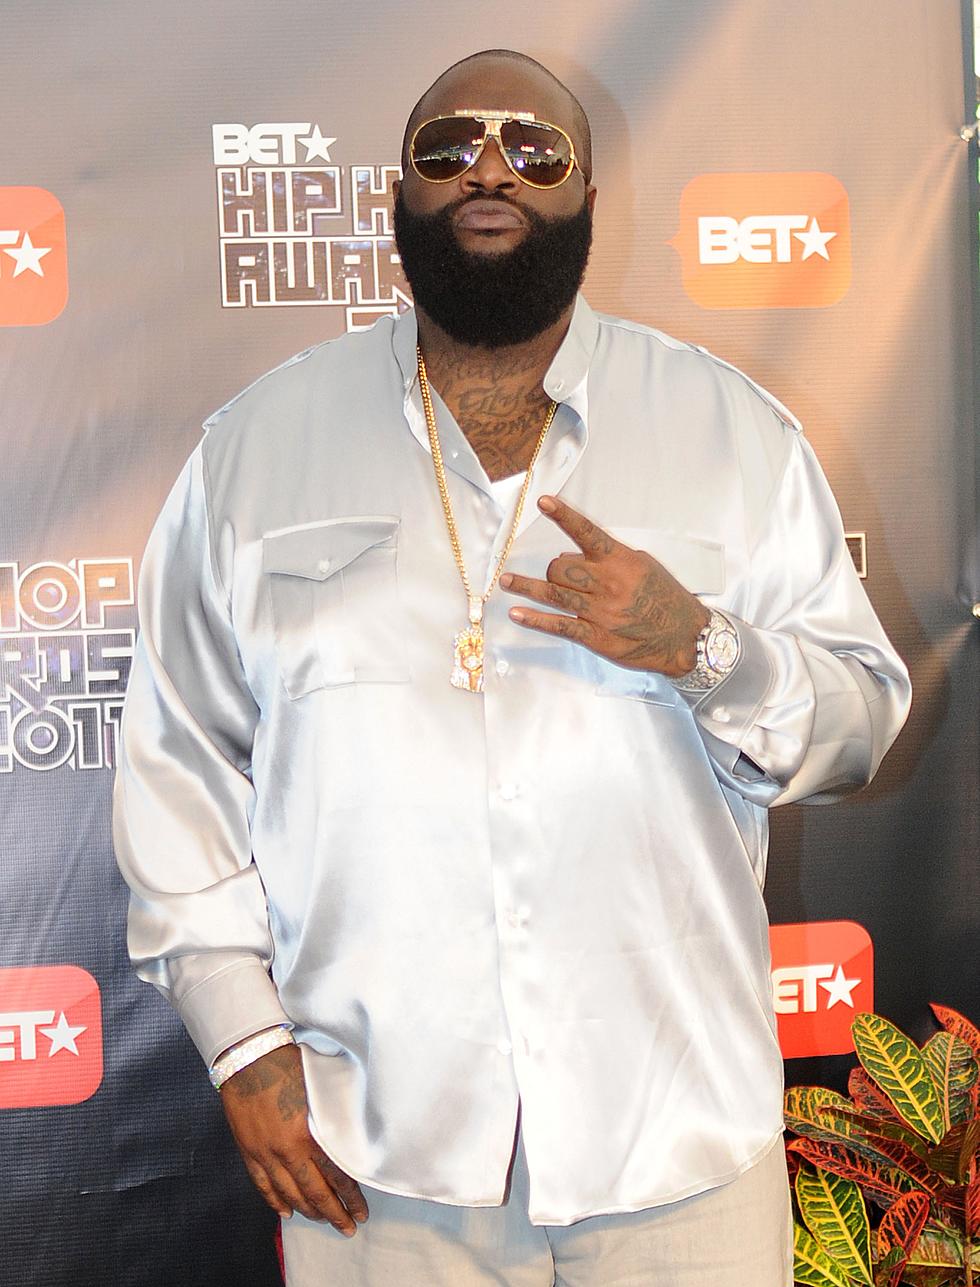 Rick Ross Ft Nicki Minaj – You The Boss [EXCLUSIVE OF THE DAY]